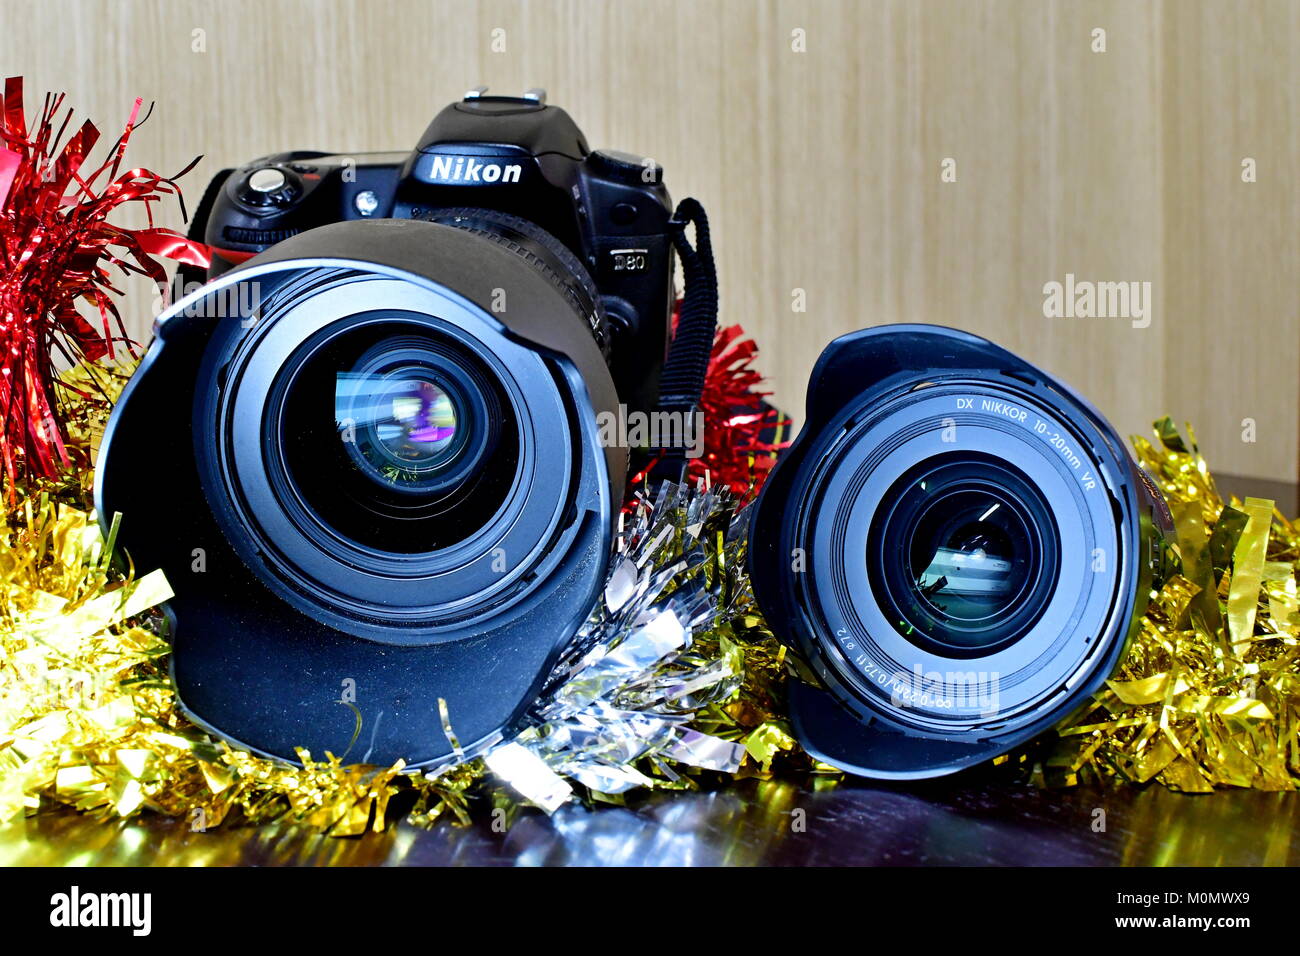 Nikon DSLR D80 and battery pack and Lenses on display and Christmas decorations as well Stock Photo